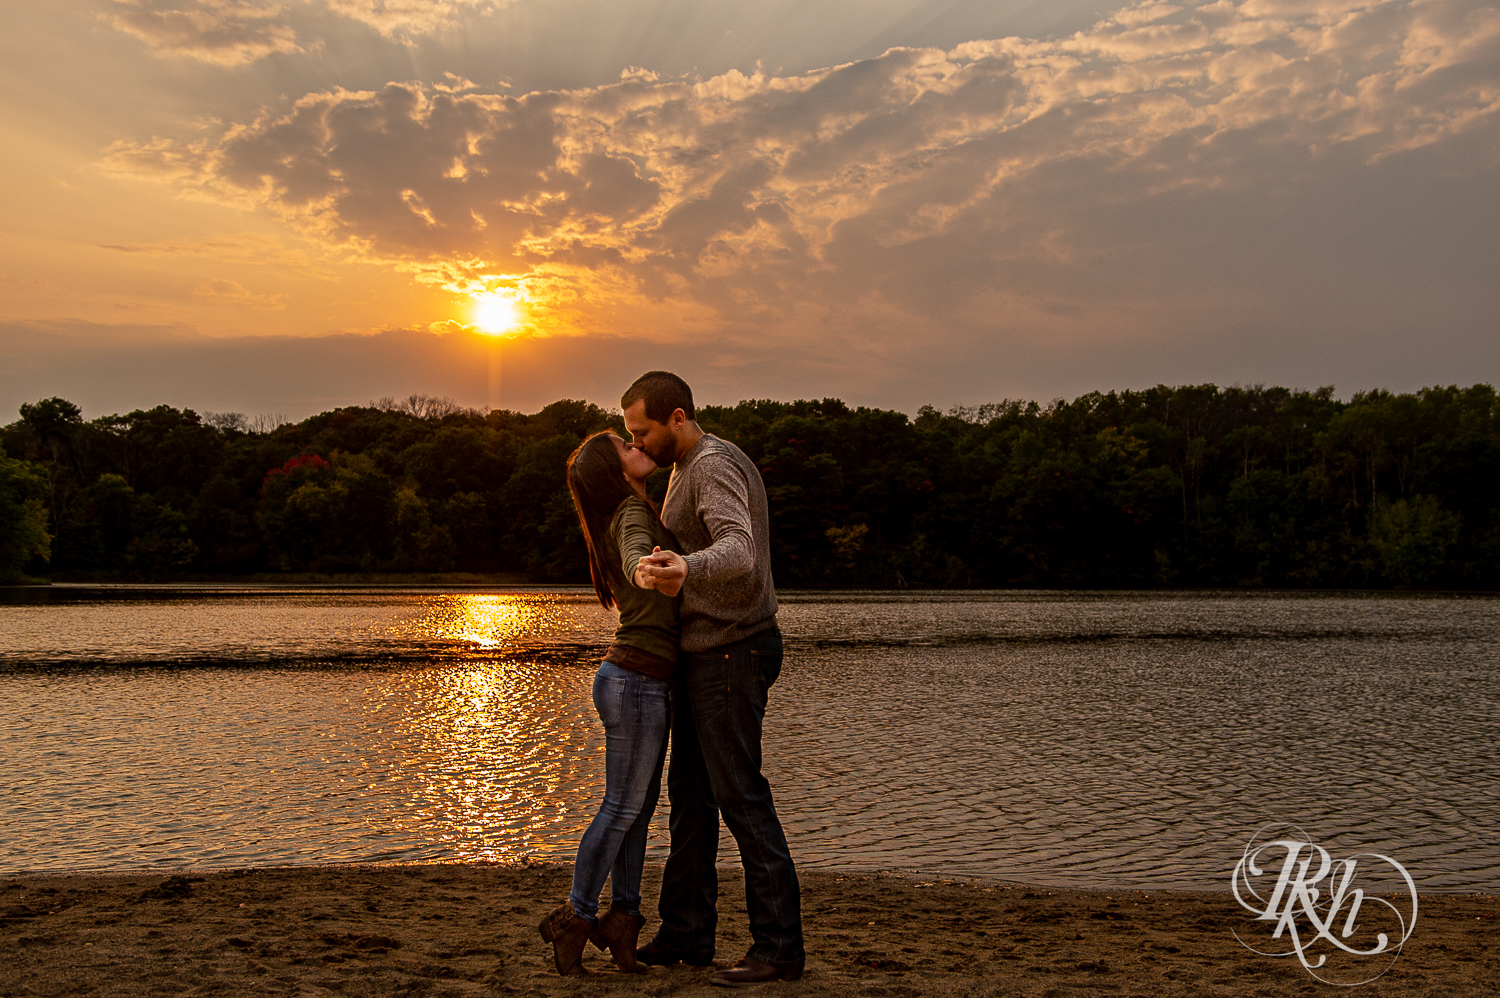 Man and woman in sweaters and jeans kiss in front of lake during sunset at Lebanon Hills Regional Park in Eagan, Minnesota.